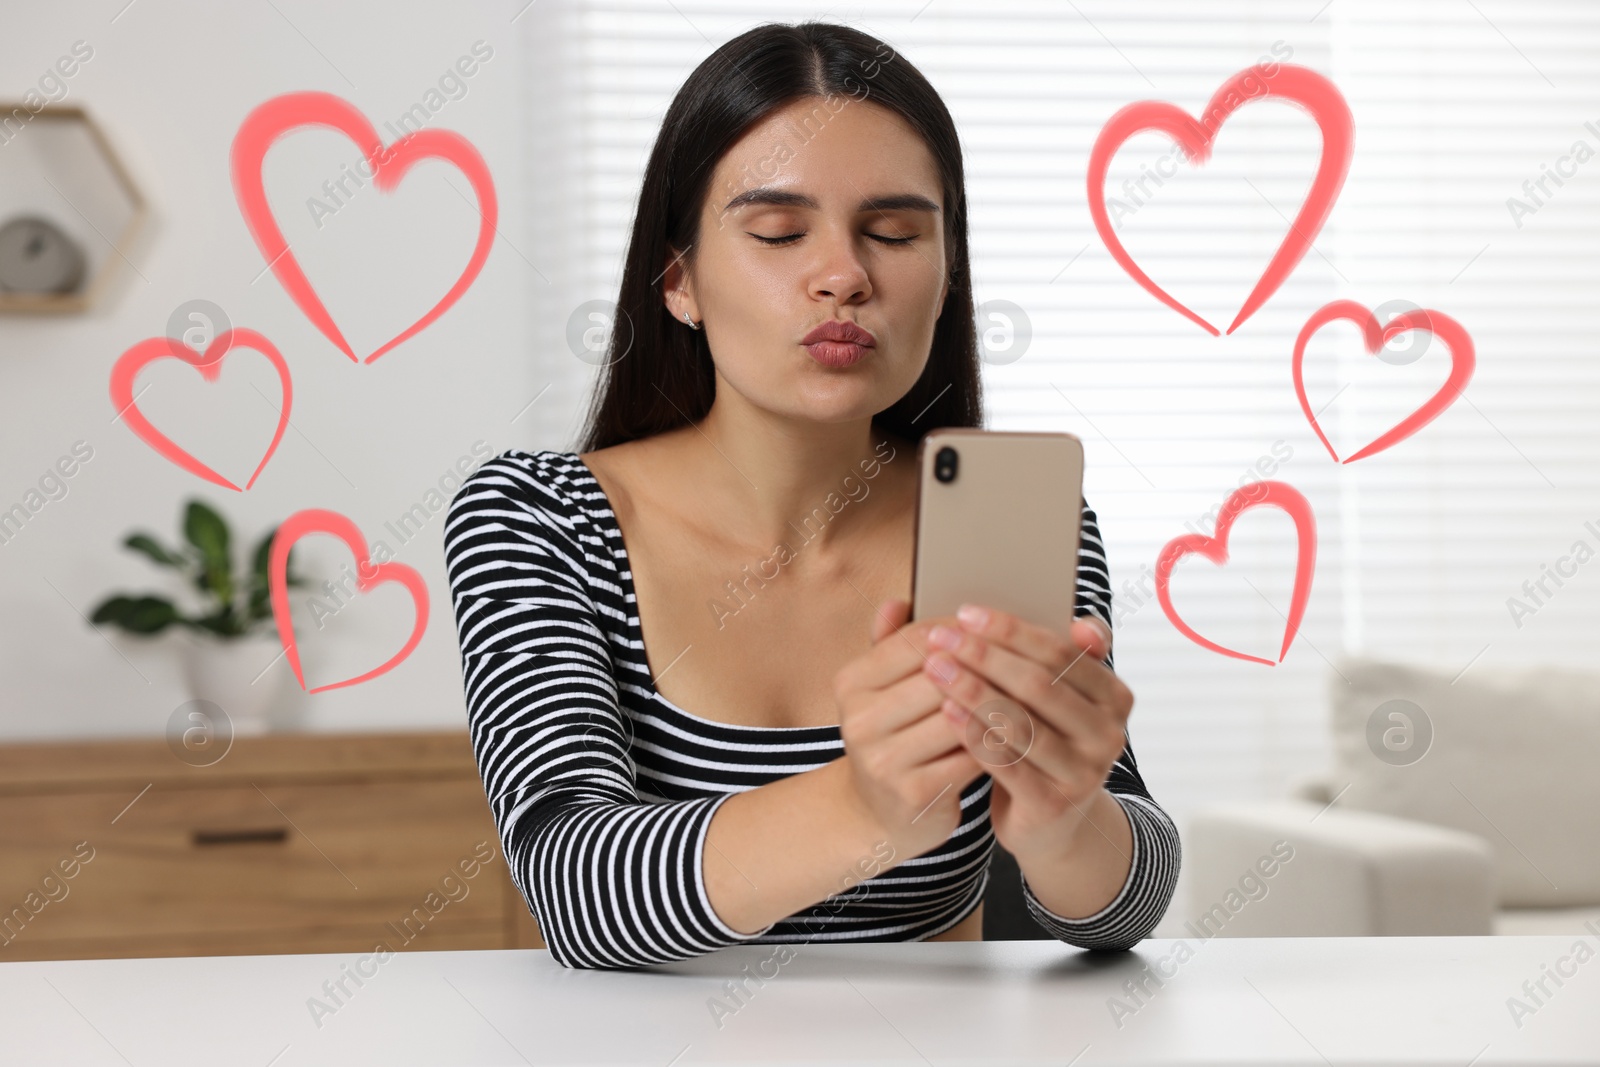 Image of Long distance relationship. Young woman sending air kiss to her loved one via video chat indoors. Red hearts around